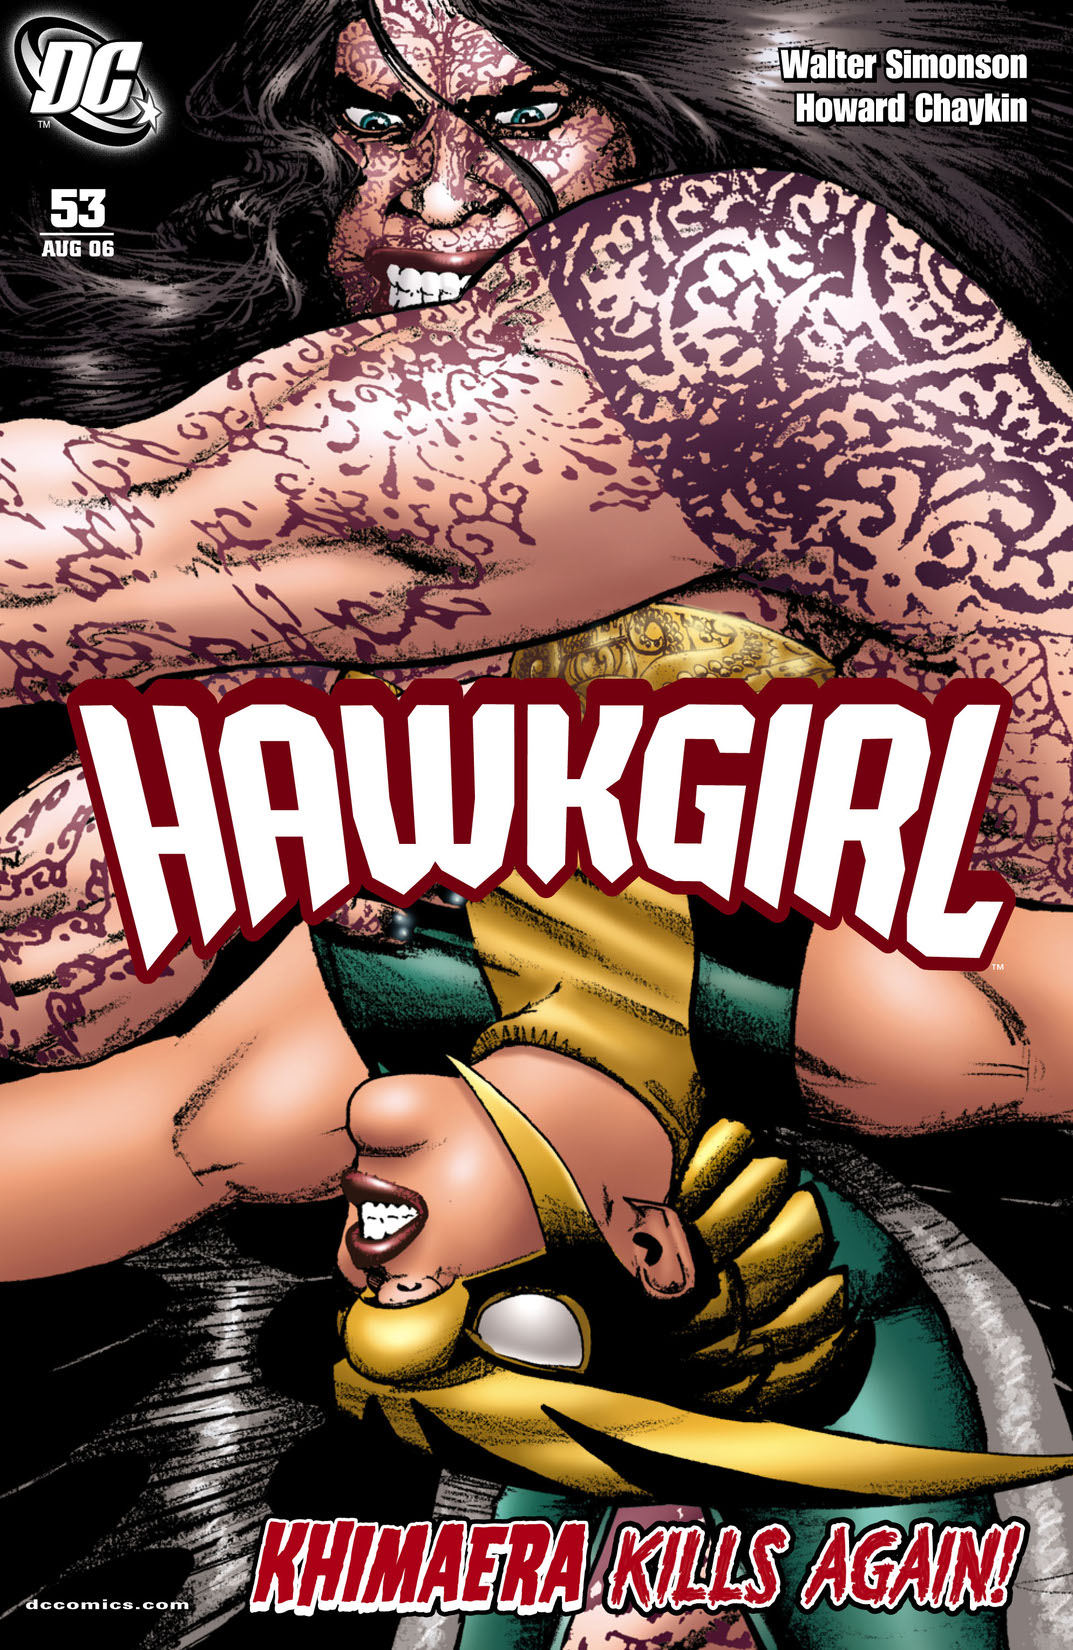 Hawkgirl #53 preview images